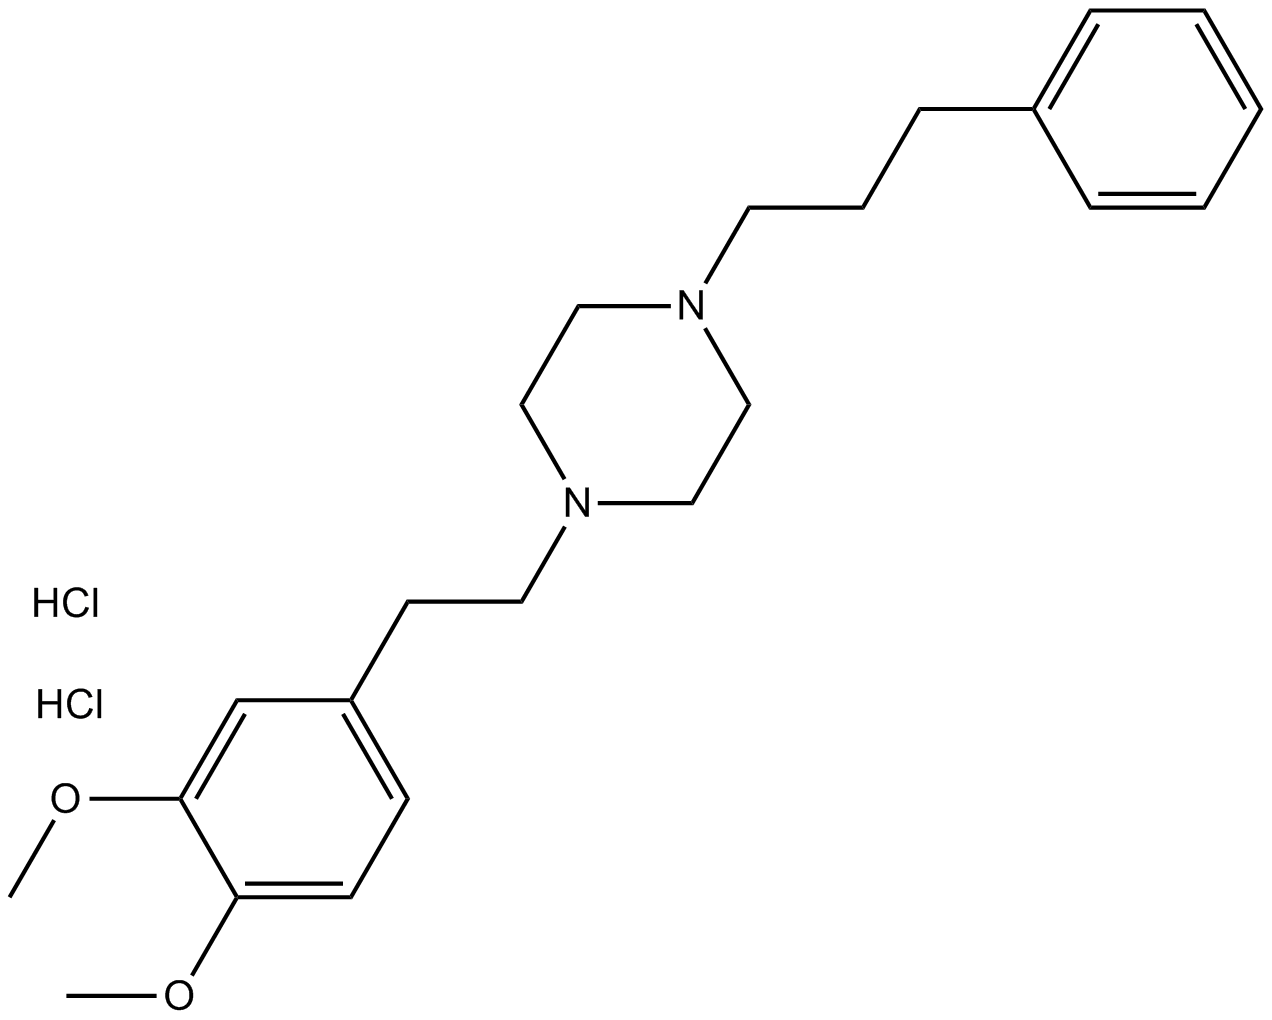 SA 4503 dihydrochloride  Chemical Structure